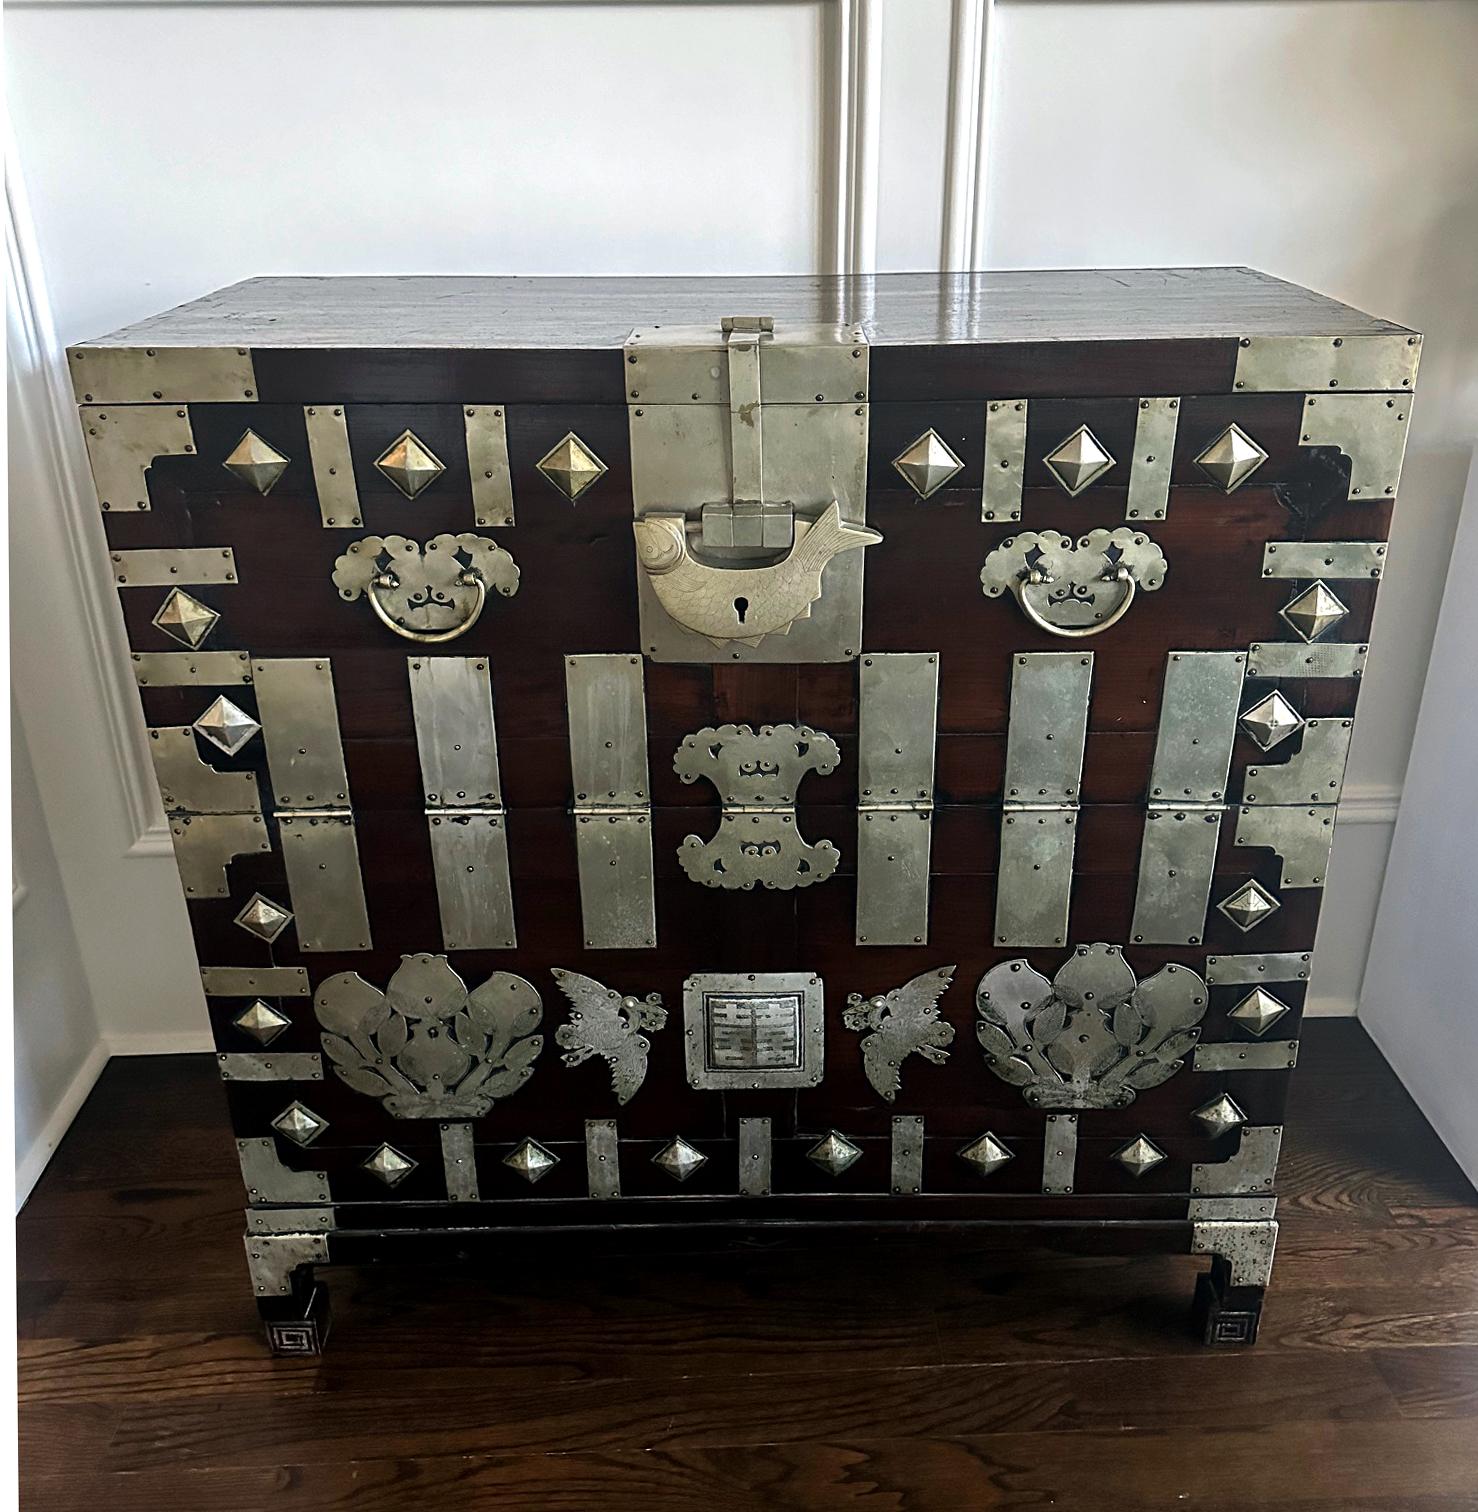 A striking Korean Bandaji with lots of original patina circa 19th century of late Joseon Dynasty. Bandaji is known as drop front half-opening chest that was used to store family valuables and beddings. The Bandaji on offer was made in Pyongyang area